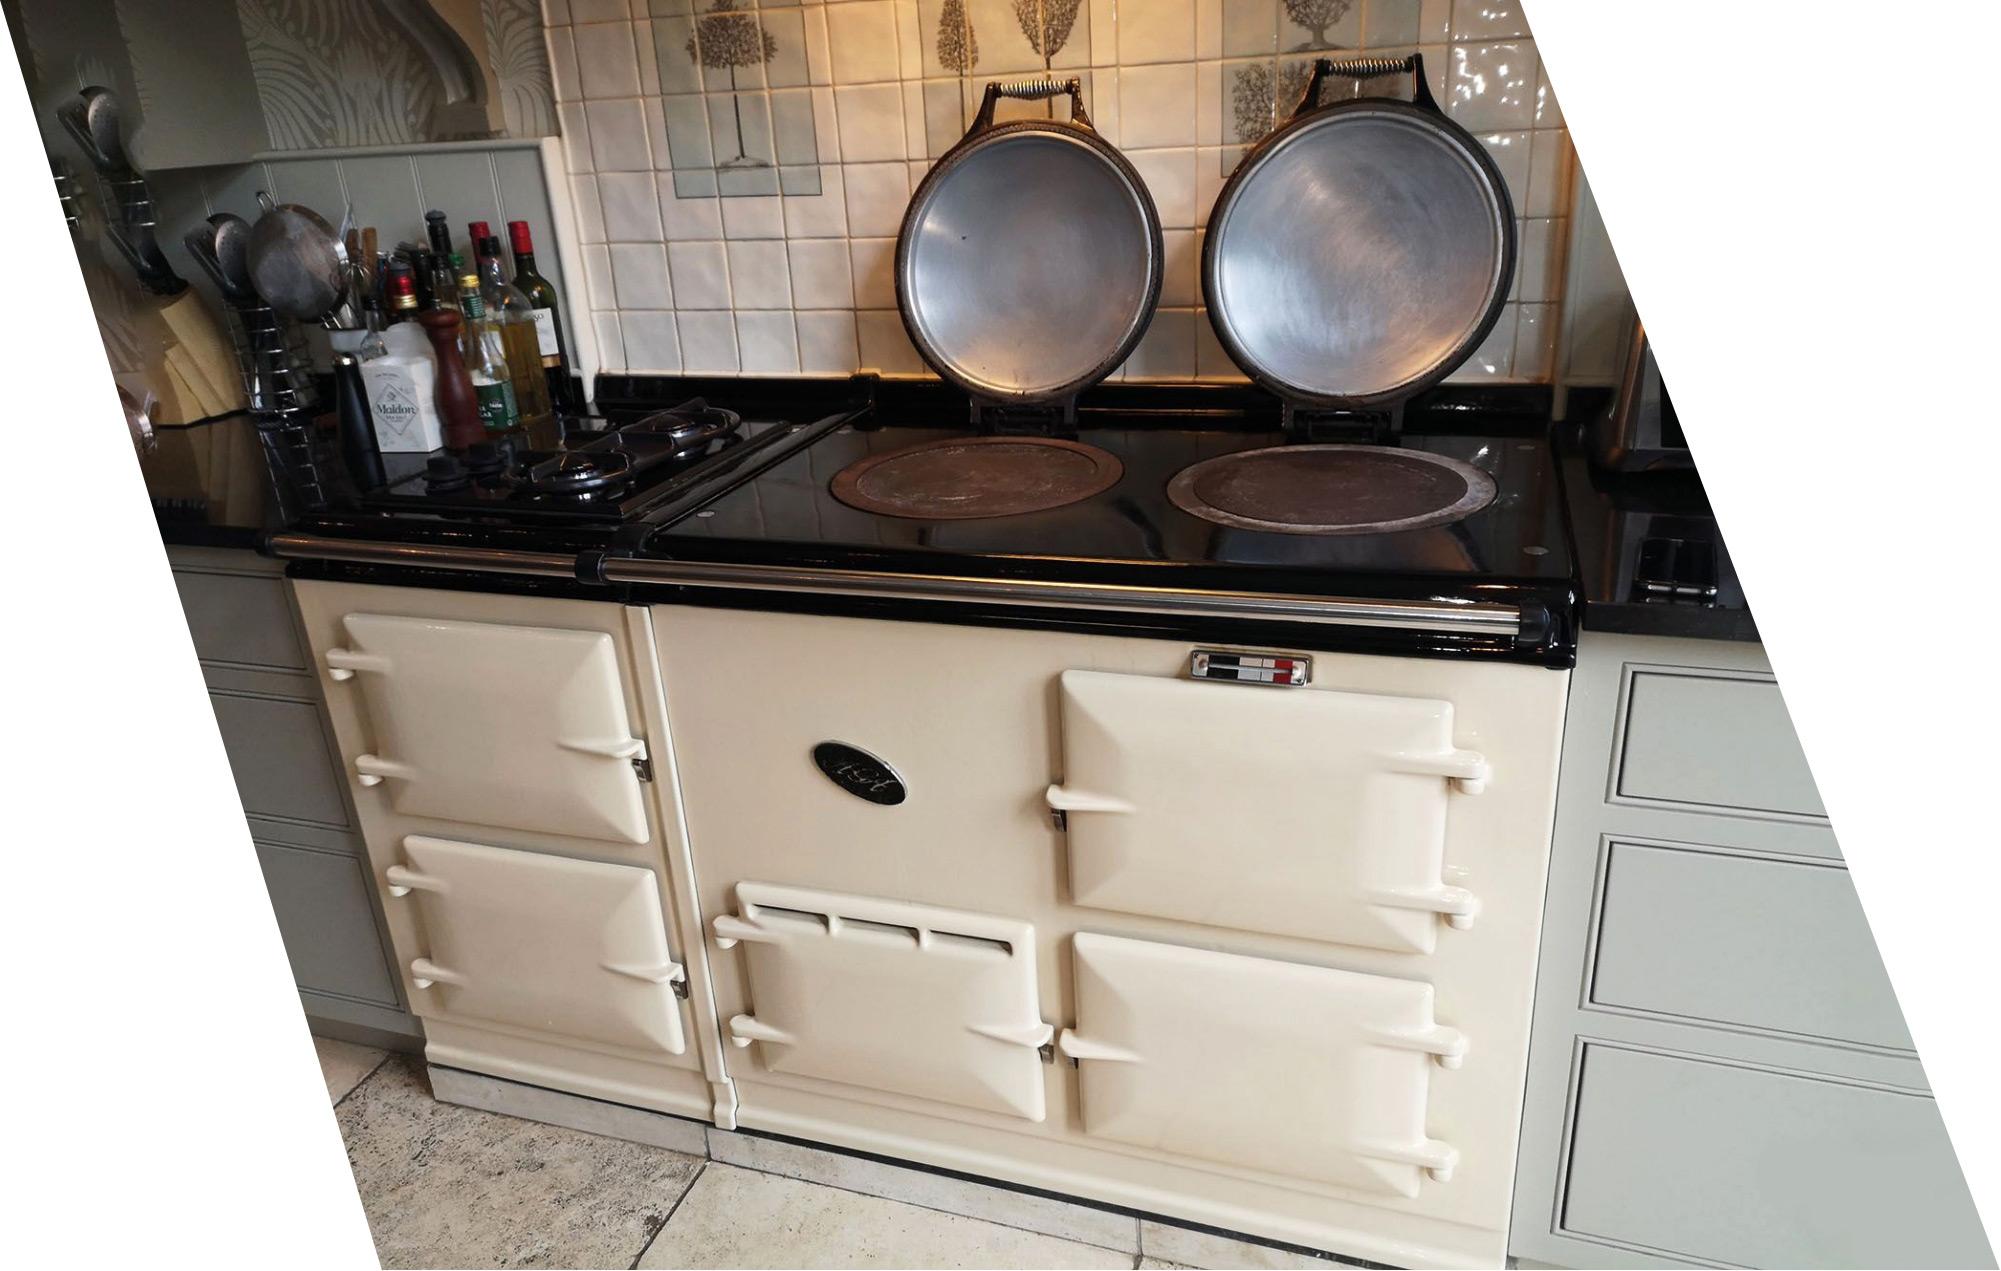 The image shows a white AGA kitchen range that has been professionally cleaned. It looks shiny and polished, almost like brand new.